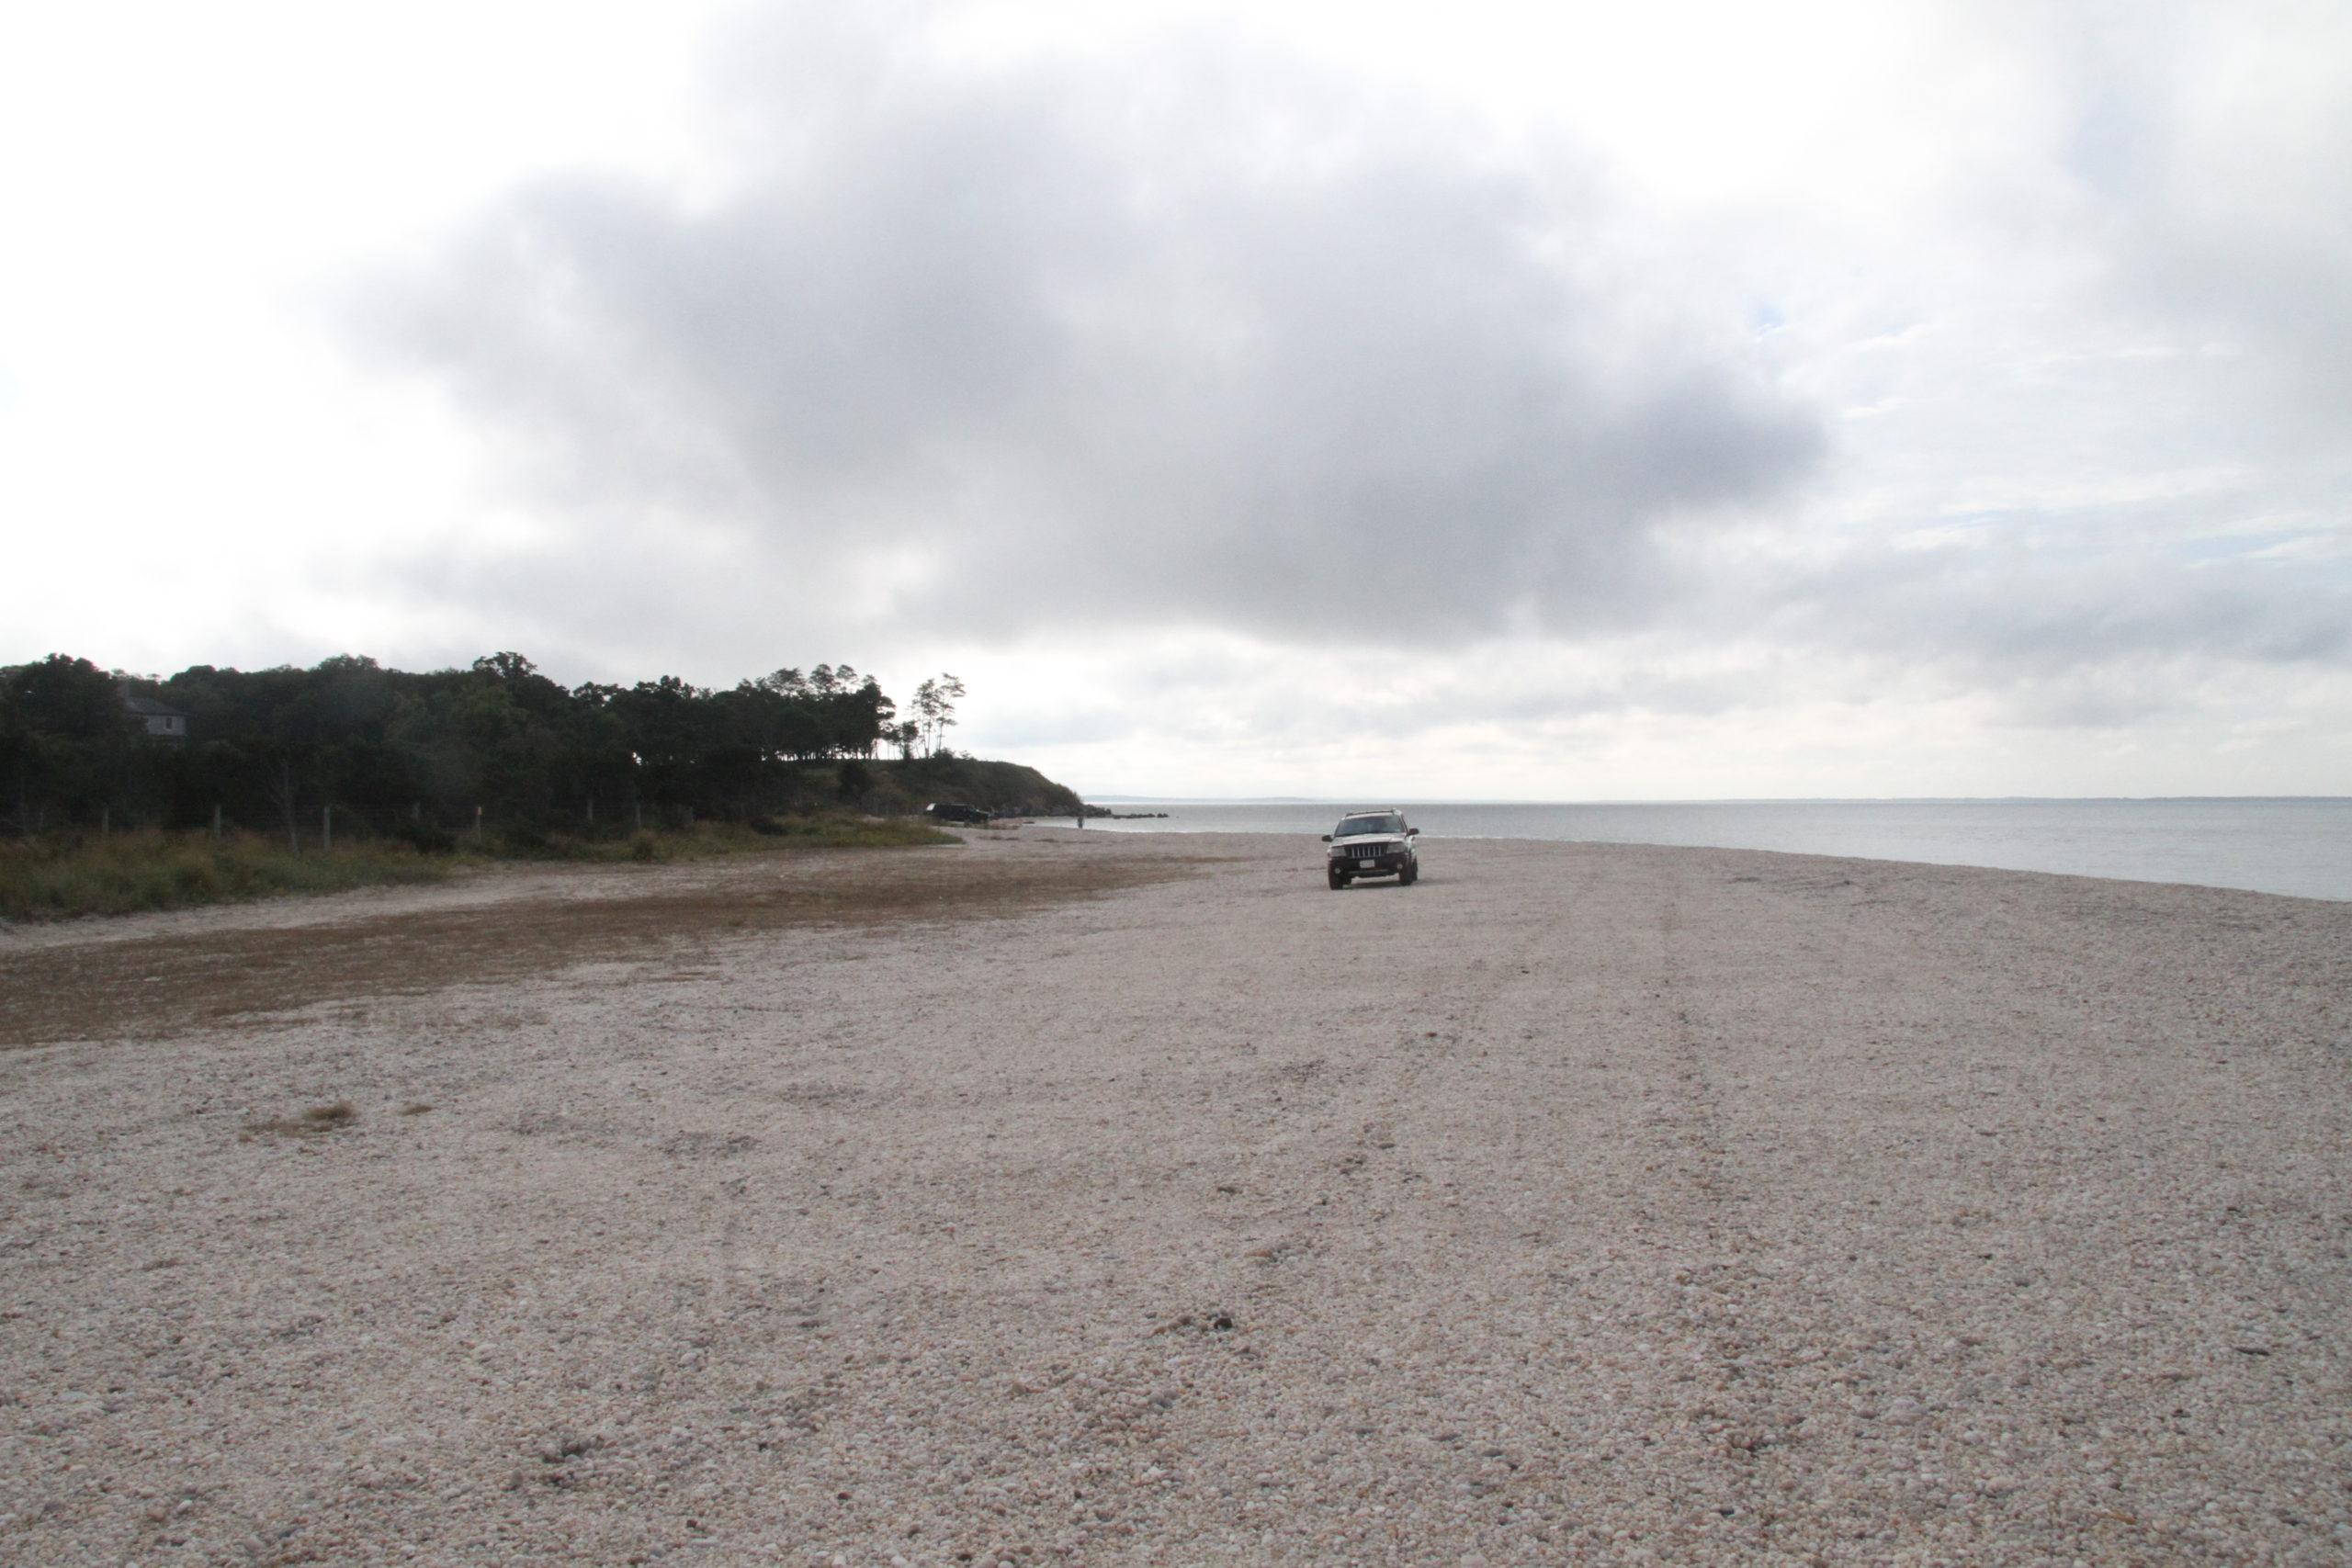 The owner of the 500-acre Cow Neck Preserve has asked the Southampton Town Conservation Board for permission to place boulders across North Sea Beach to prevent 4x4 vehicle access to the western post portions of the beach. 